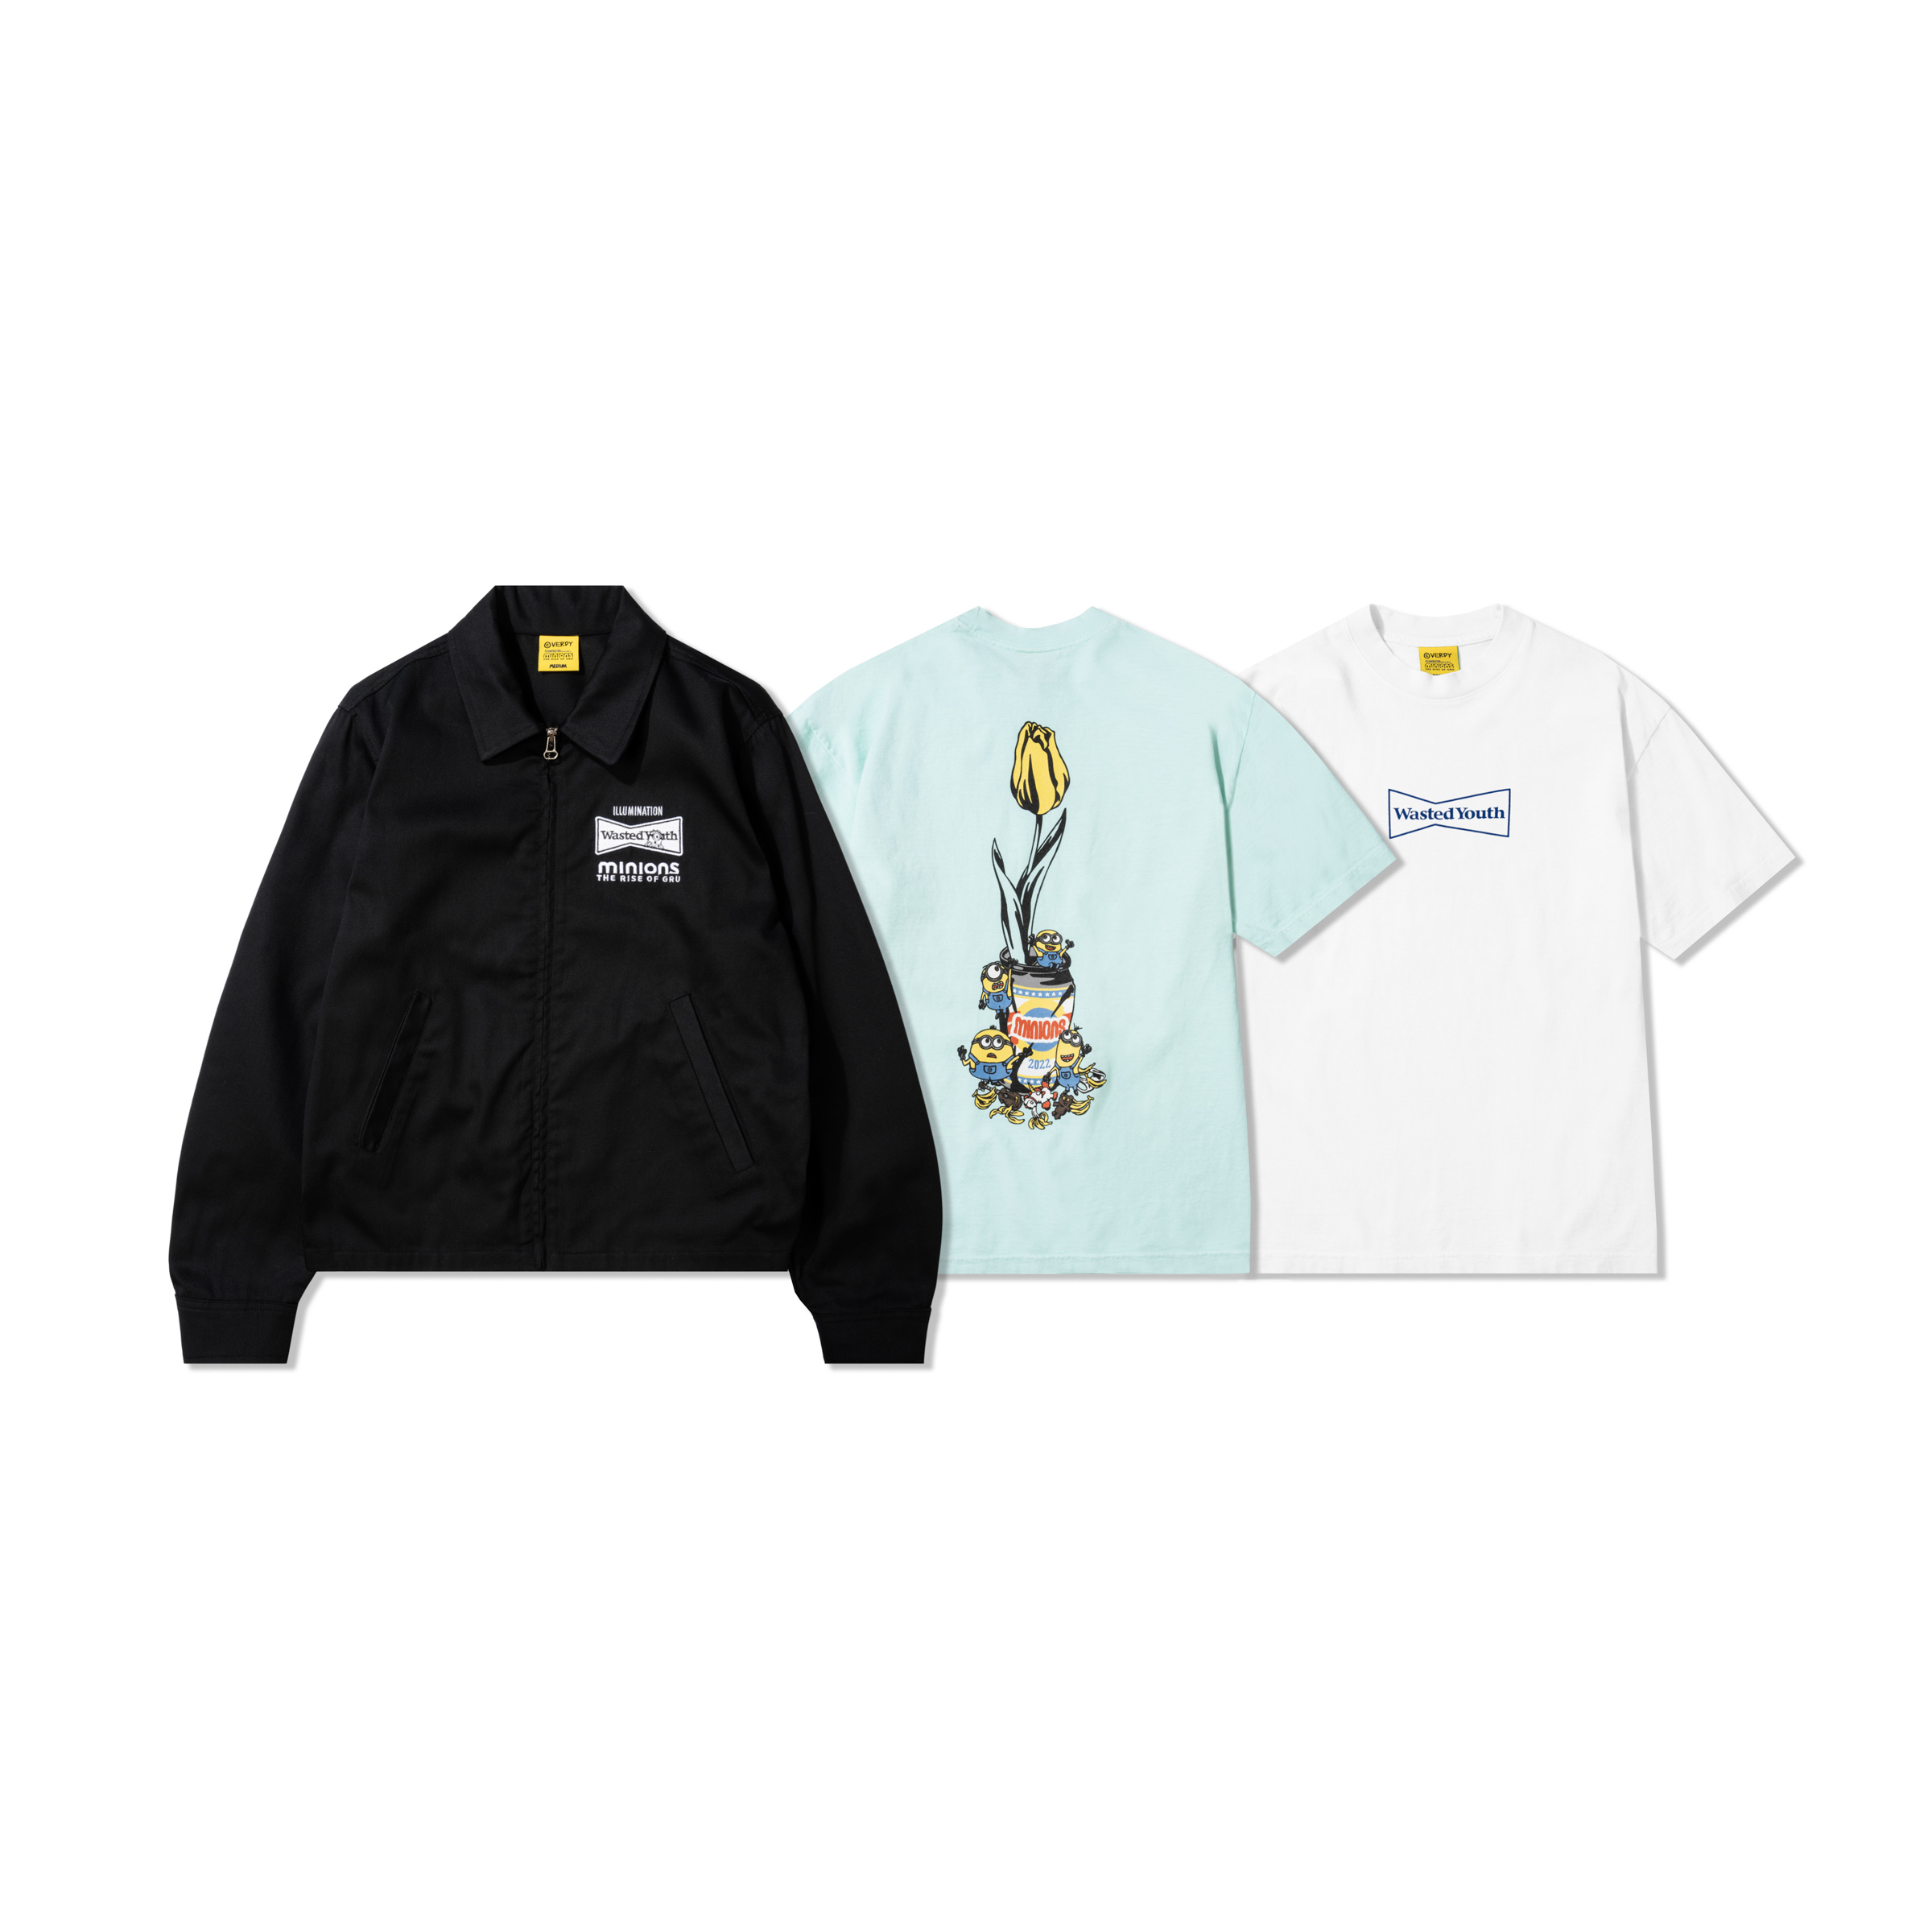 WASTED YOUTH x MINIONS T-SHIRT ミニオン M Tシャツ/カットソー(半袖/袖なし) クリアランスお得セール